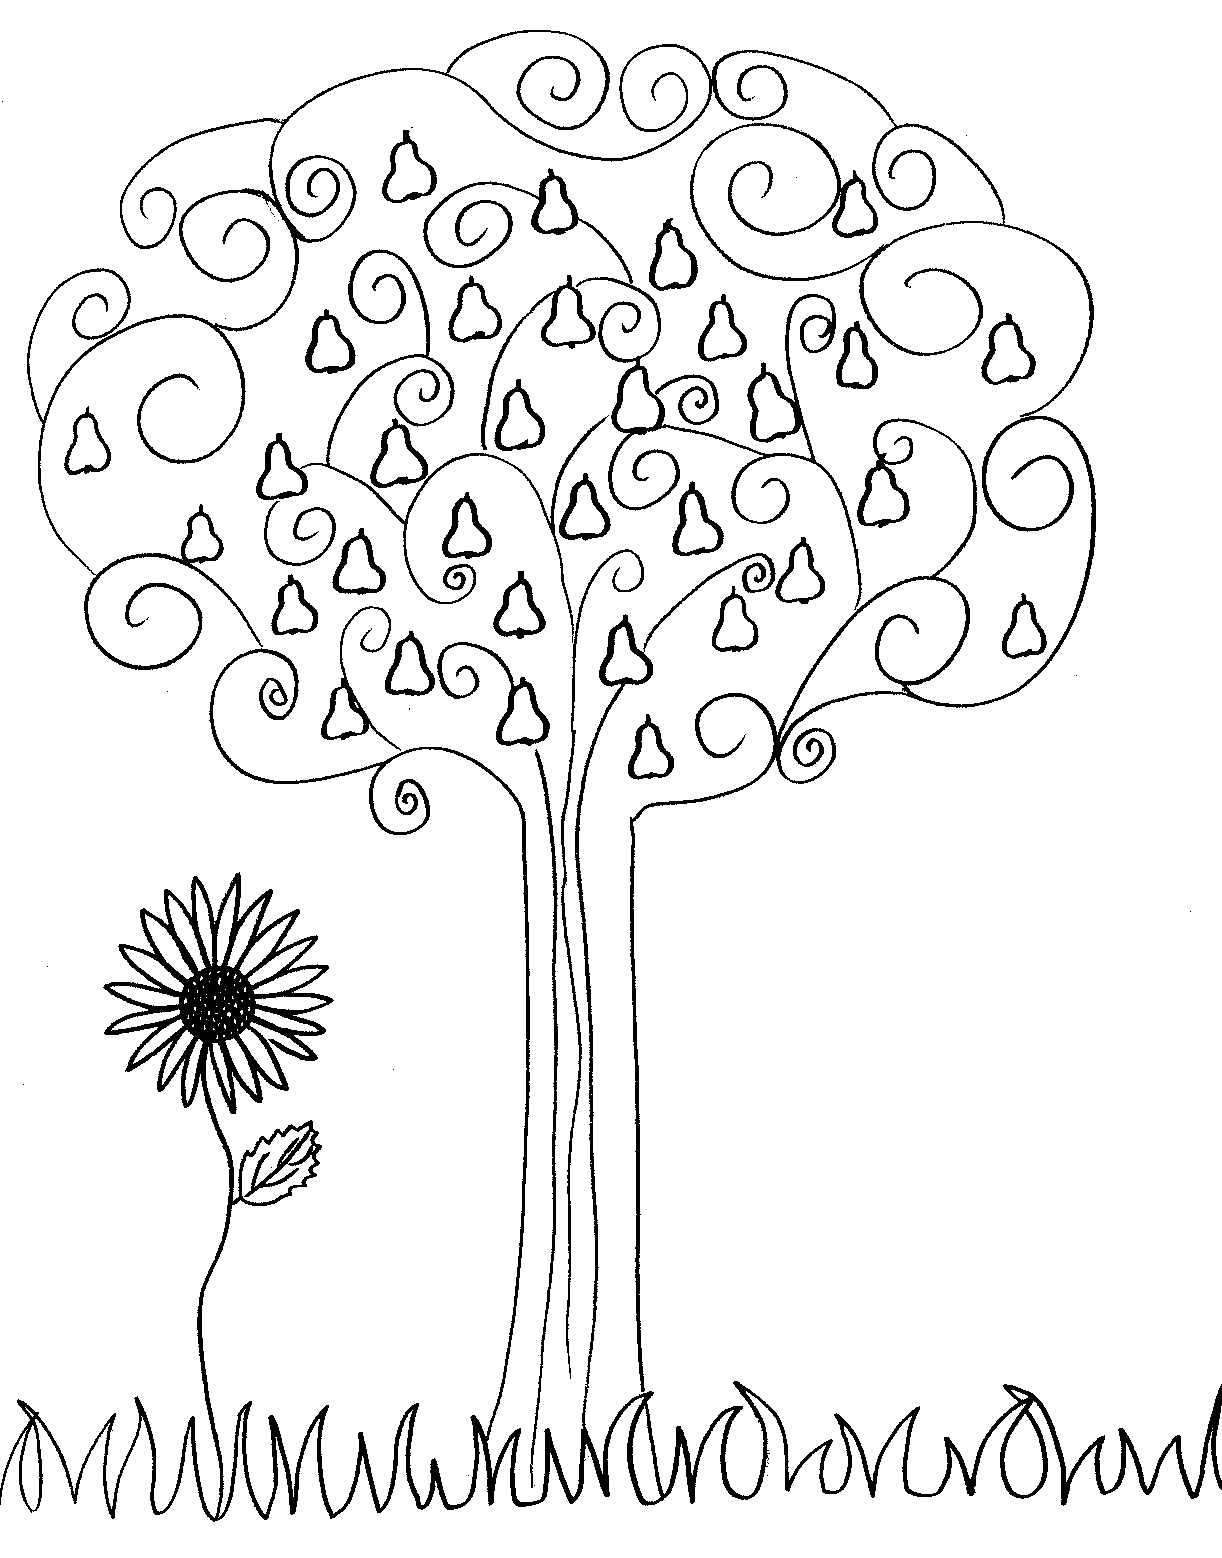 Simple drawing of a tree and a flower